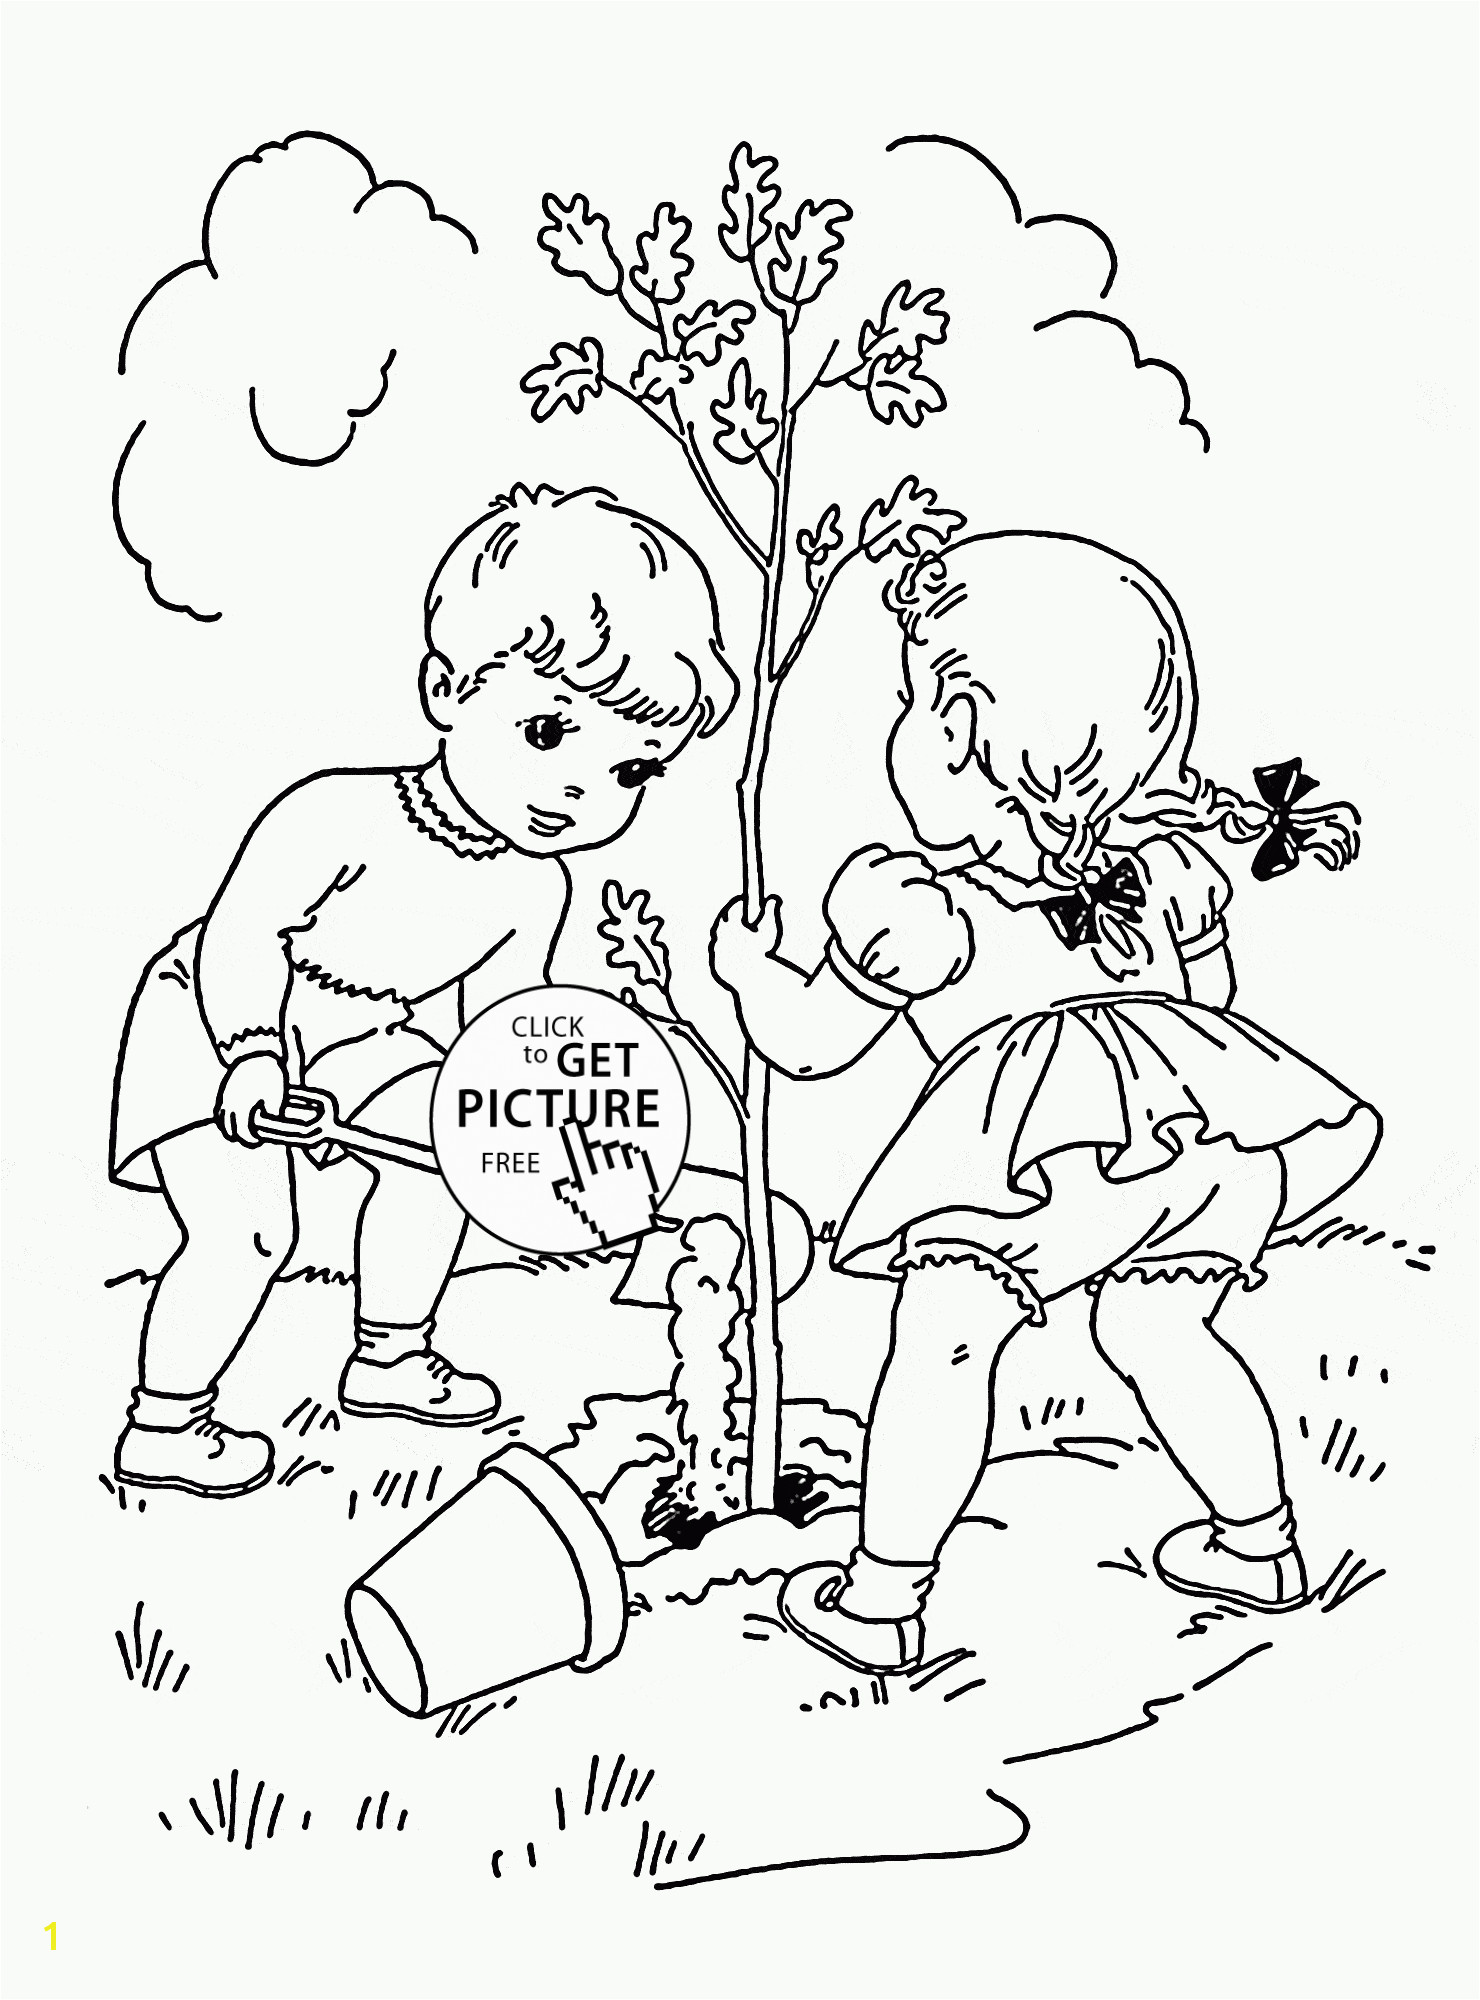 Coloring Pages Of Summer Clothes Children Plant Tree Coloring Page for Kids Spring Coloring Pages